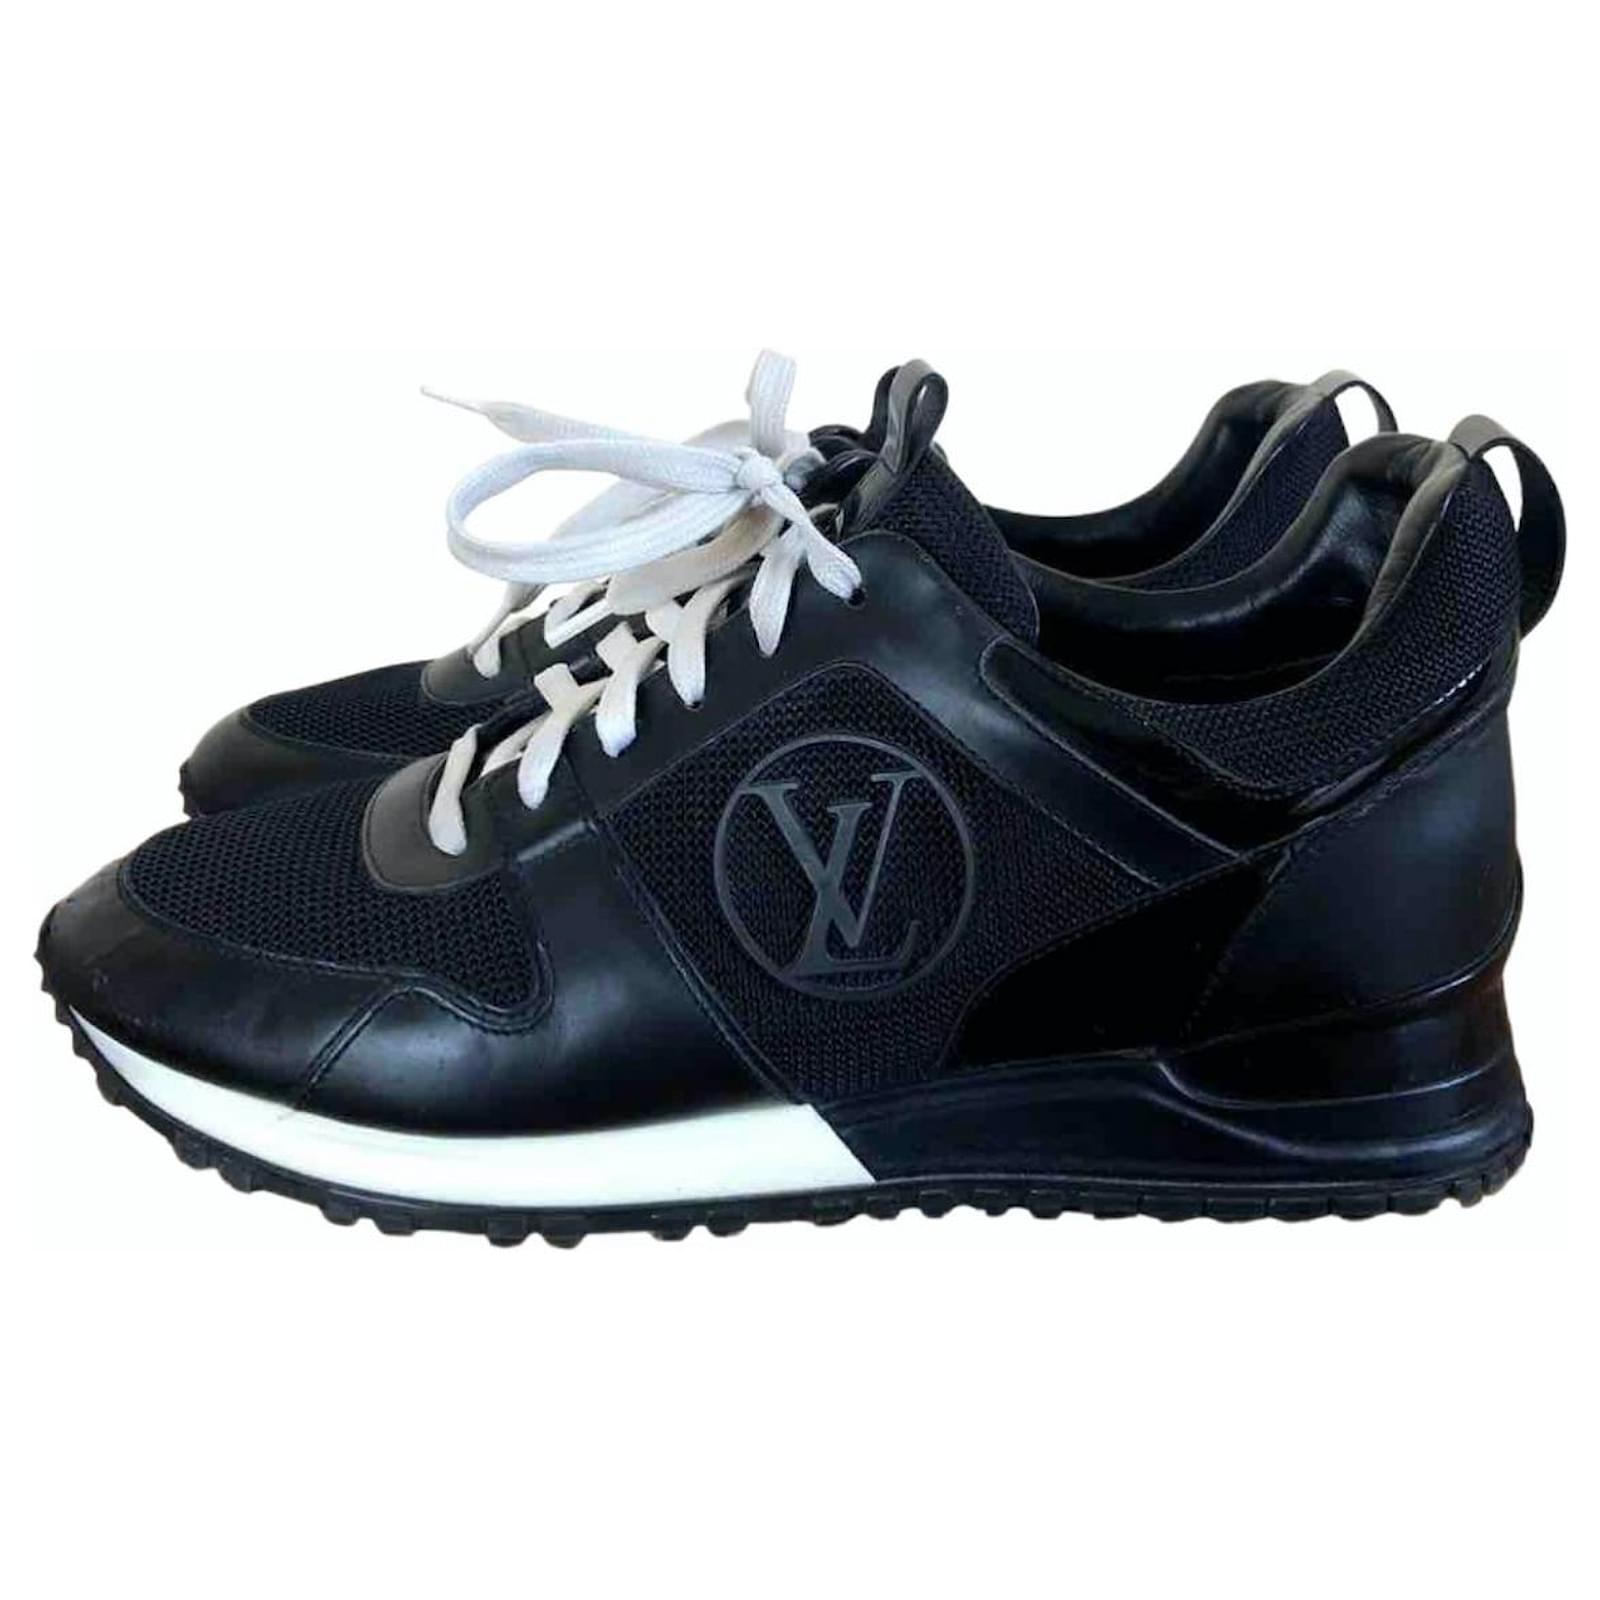 Run away leather trainers Louis Vuitton Black size 37 EU in Leather -  35212278